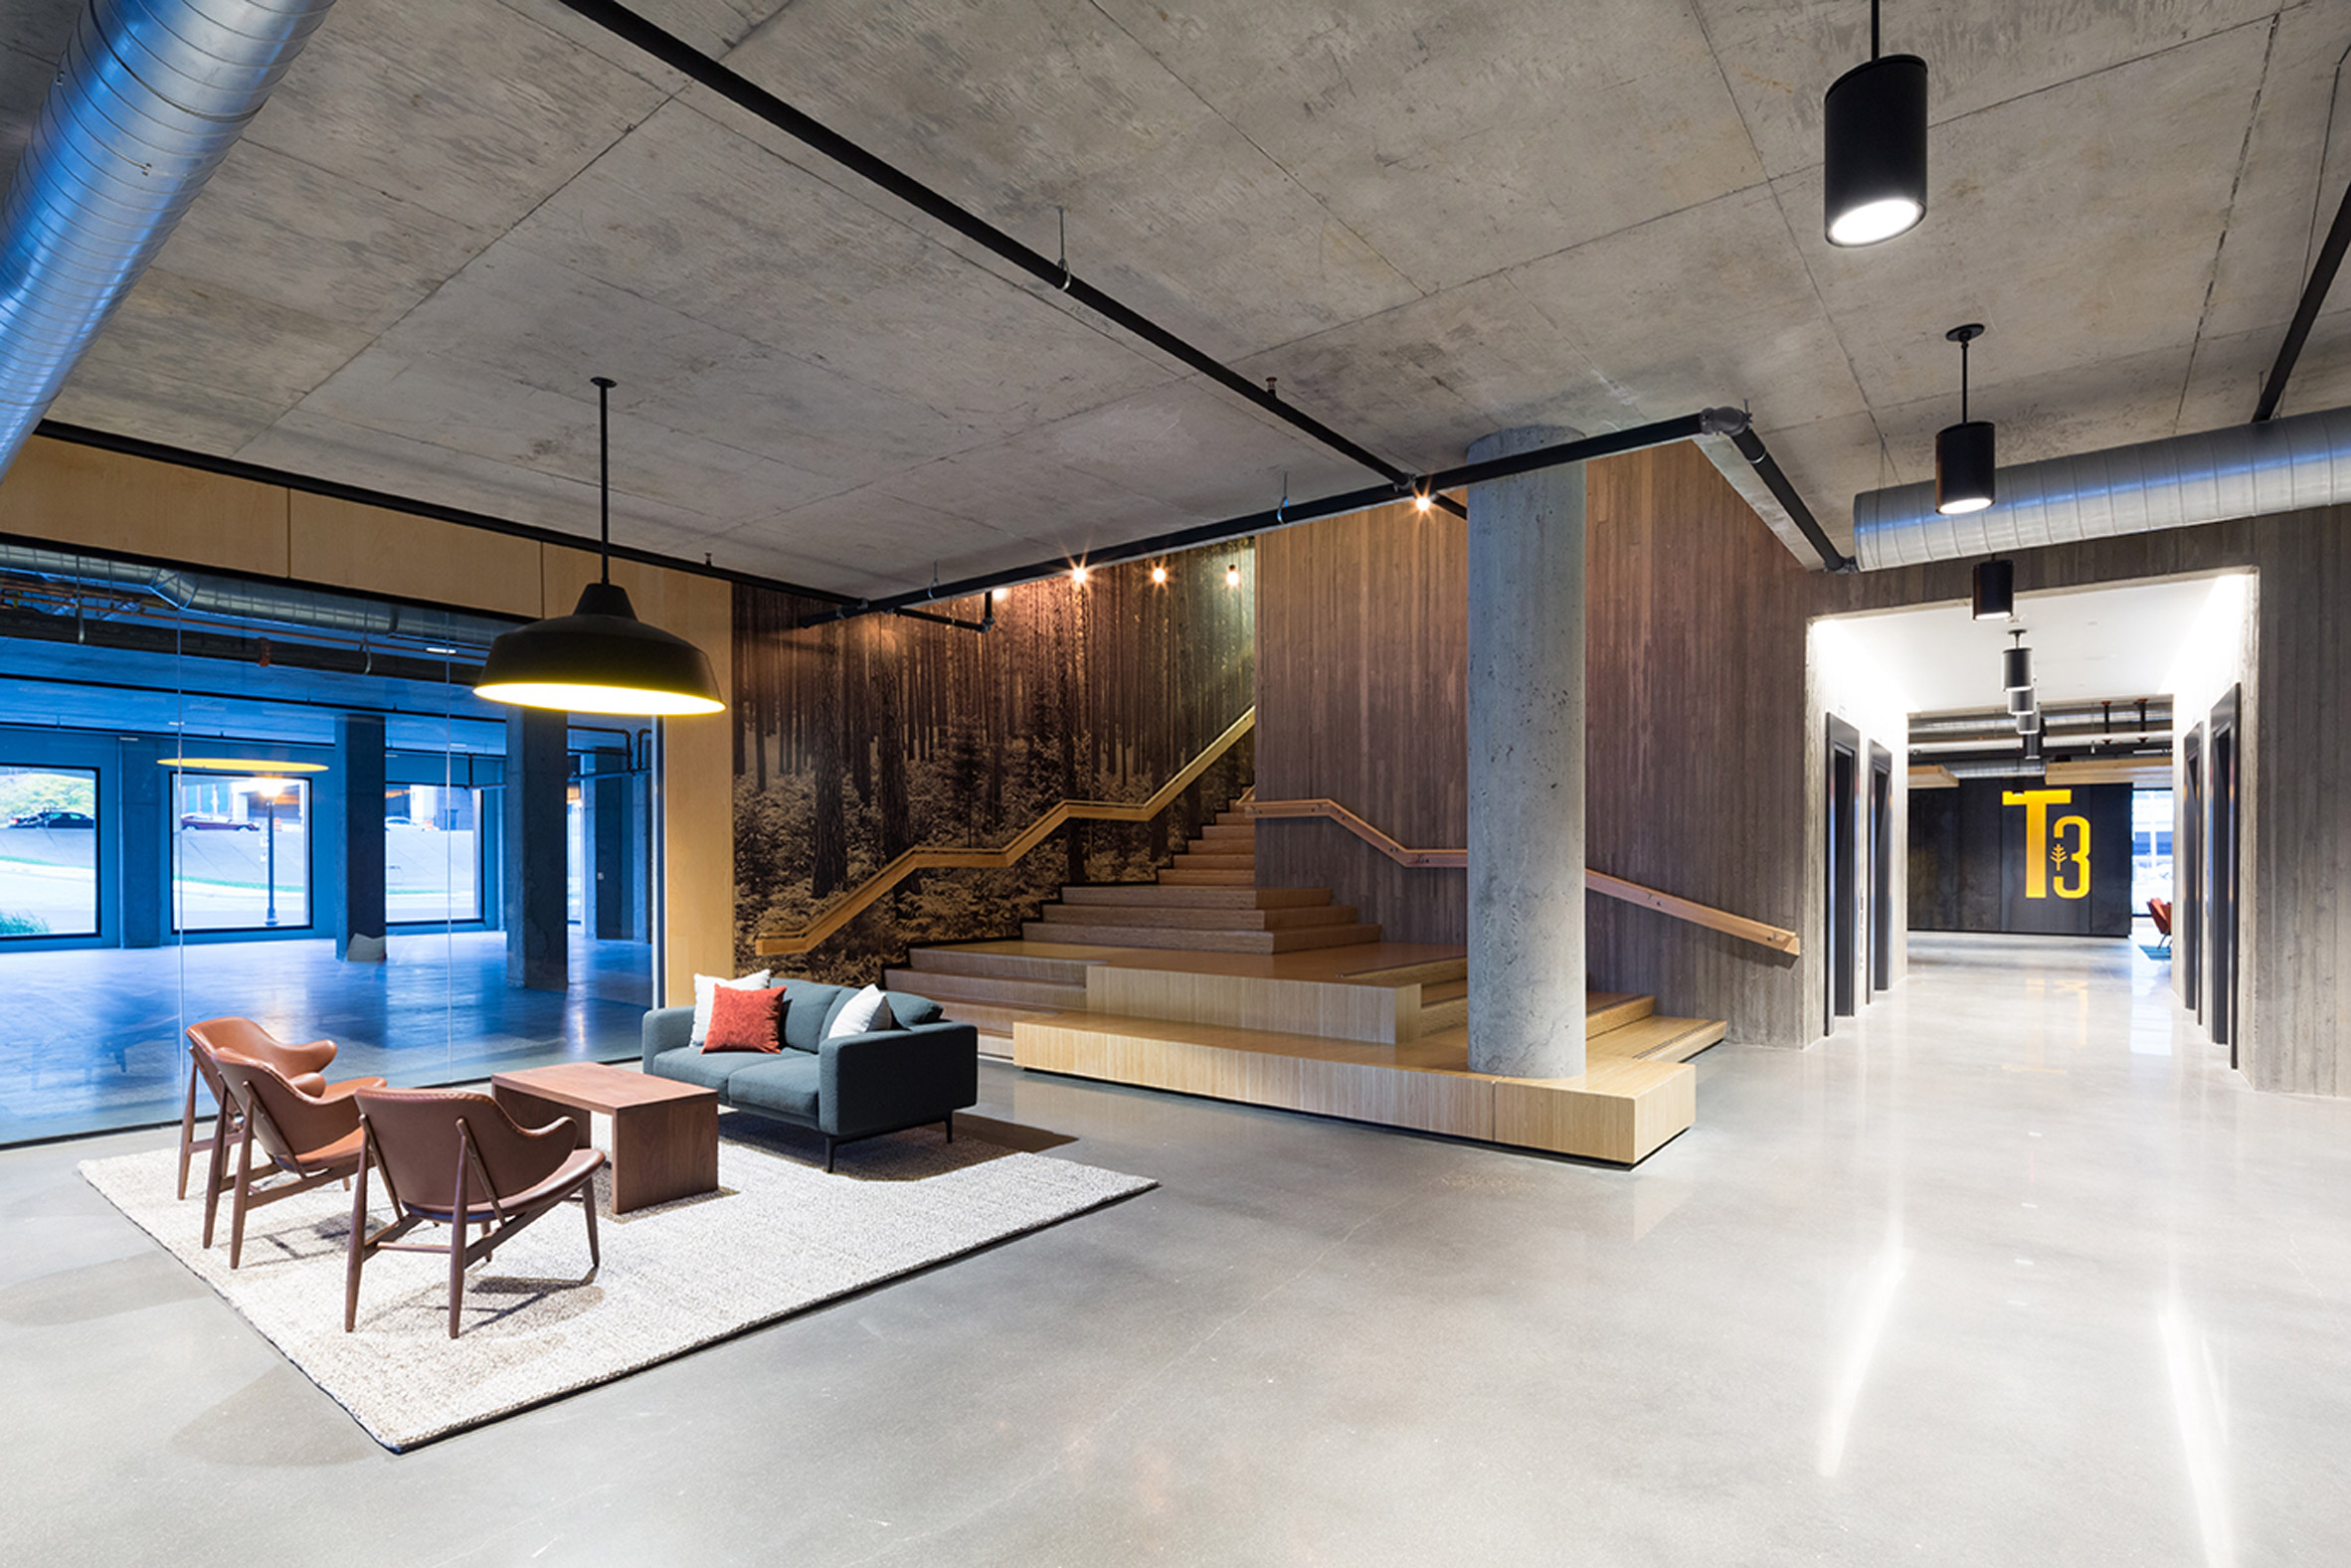 Interior of an office lounge space with concrete floors and ceiling and a wooden staircase